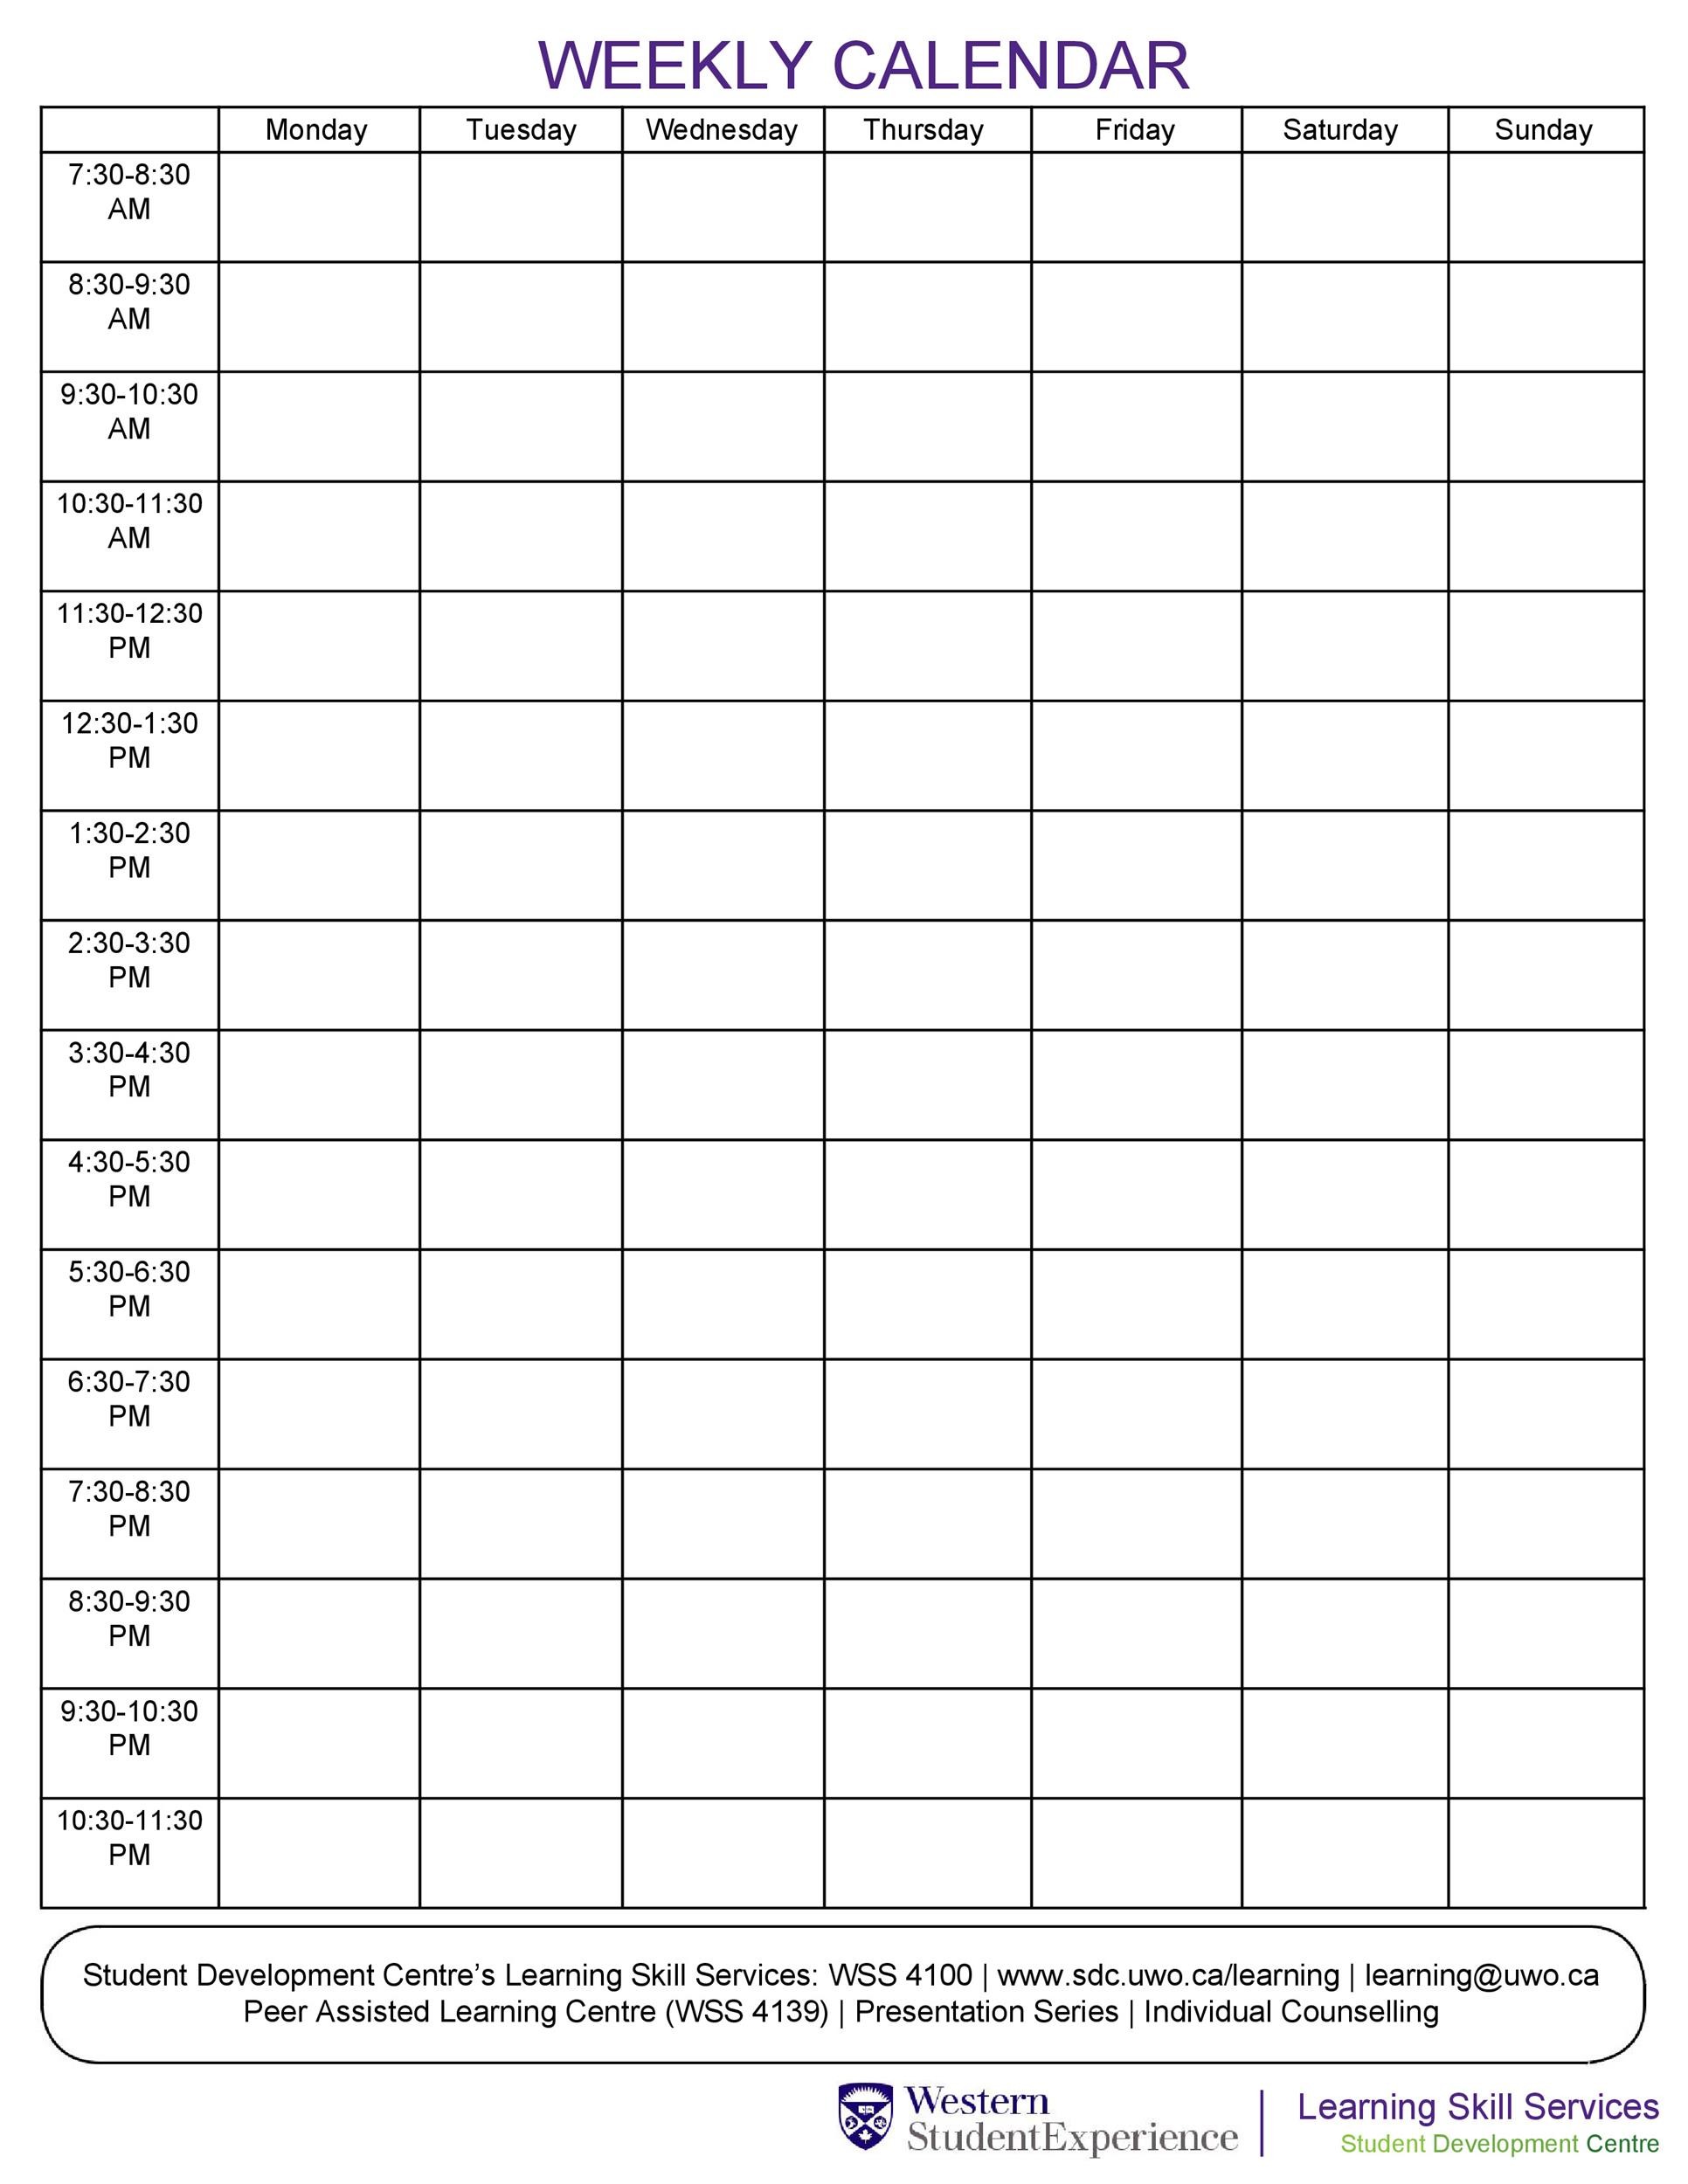 Hourly Planner Printable Free